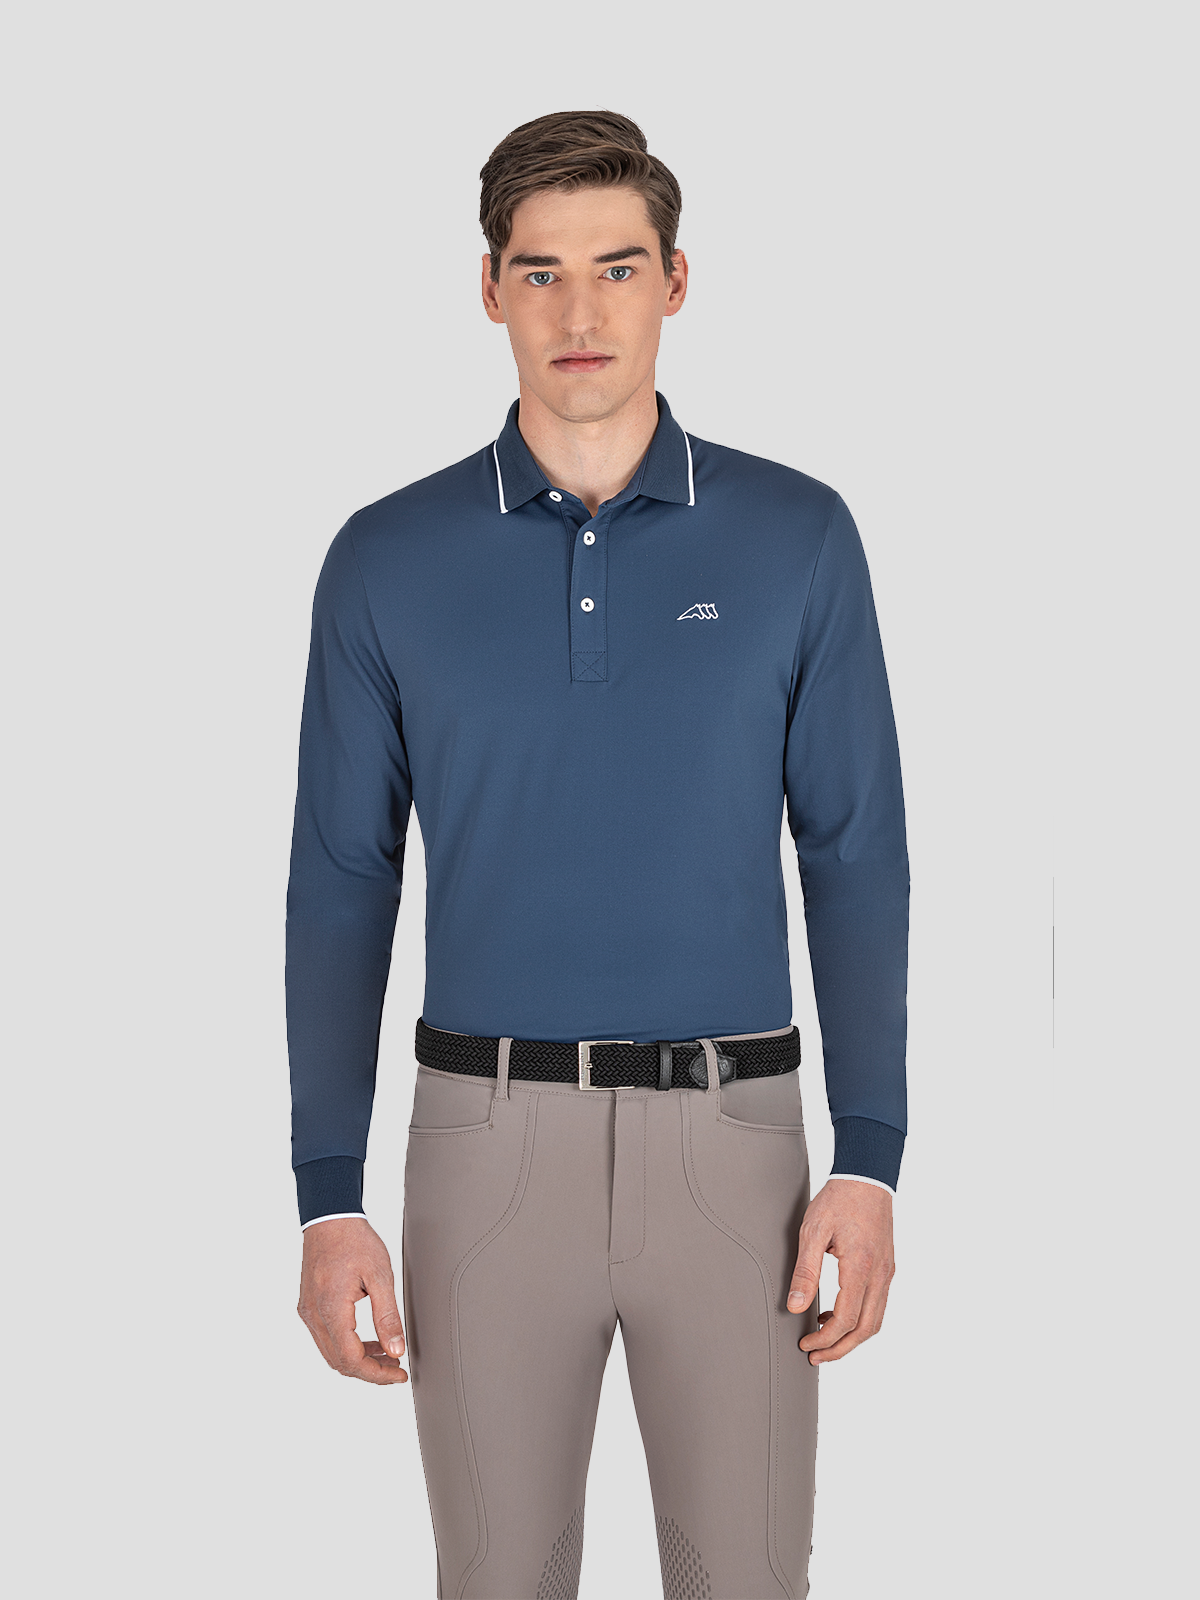 Eliae Long Sleeve Men's Polo Shirt - front view